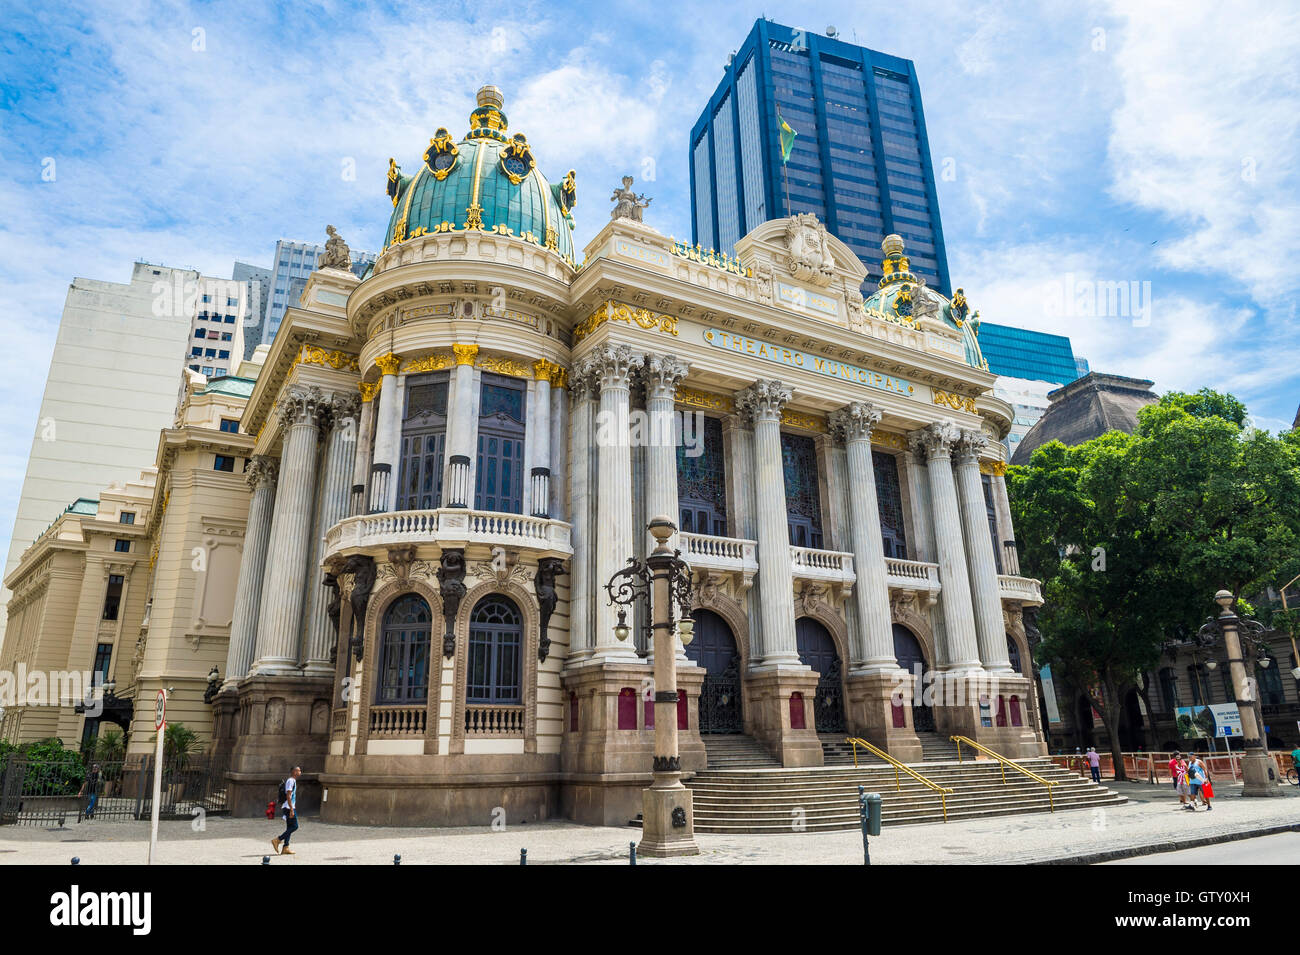 RIO DE JANEIRO - FEBRUARY 26, 2016: The Municipal Theatre, built in an Art Nouveau style inspired by the Paris Opera. Stock Photo